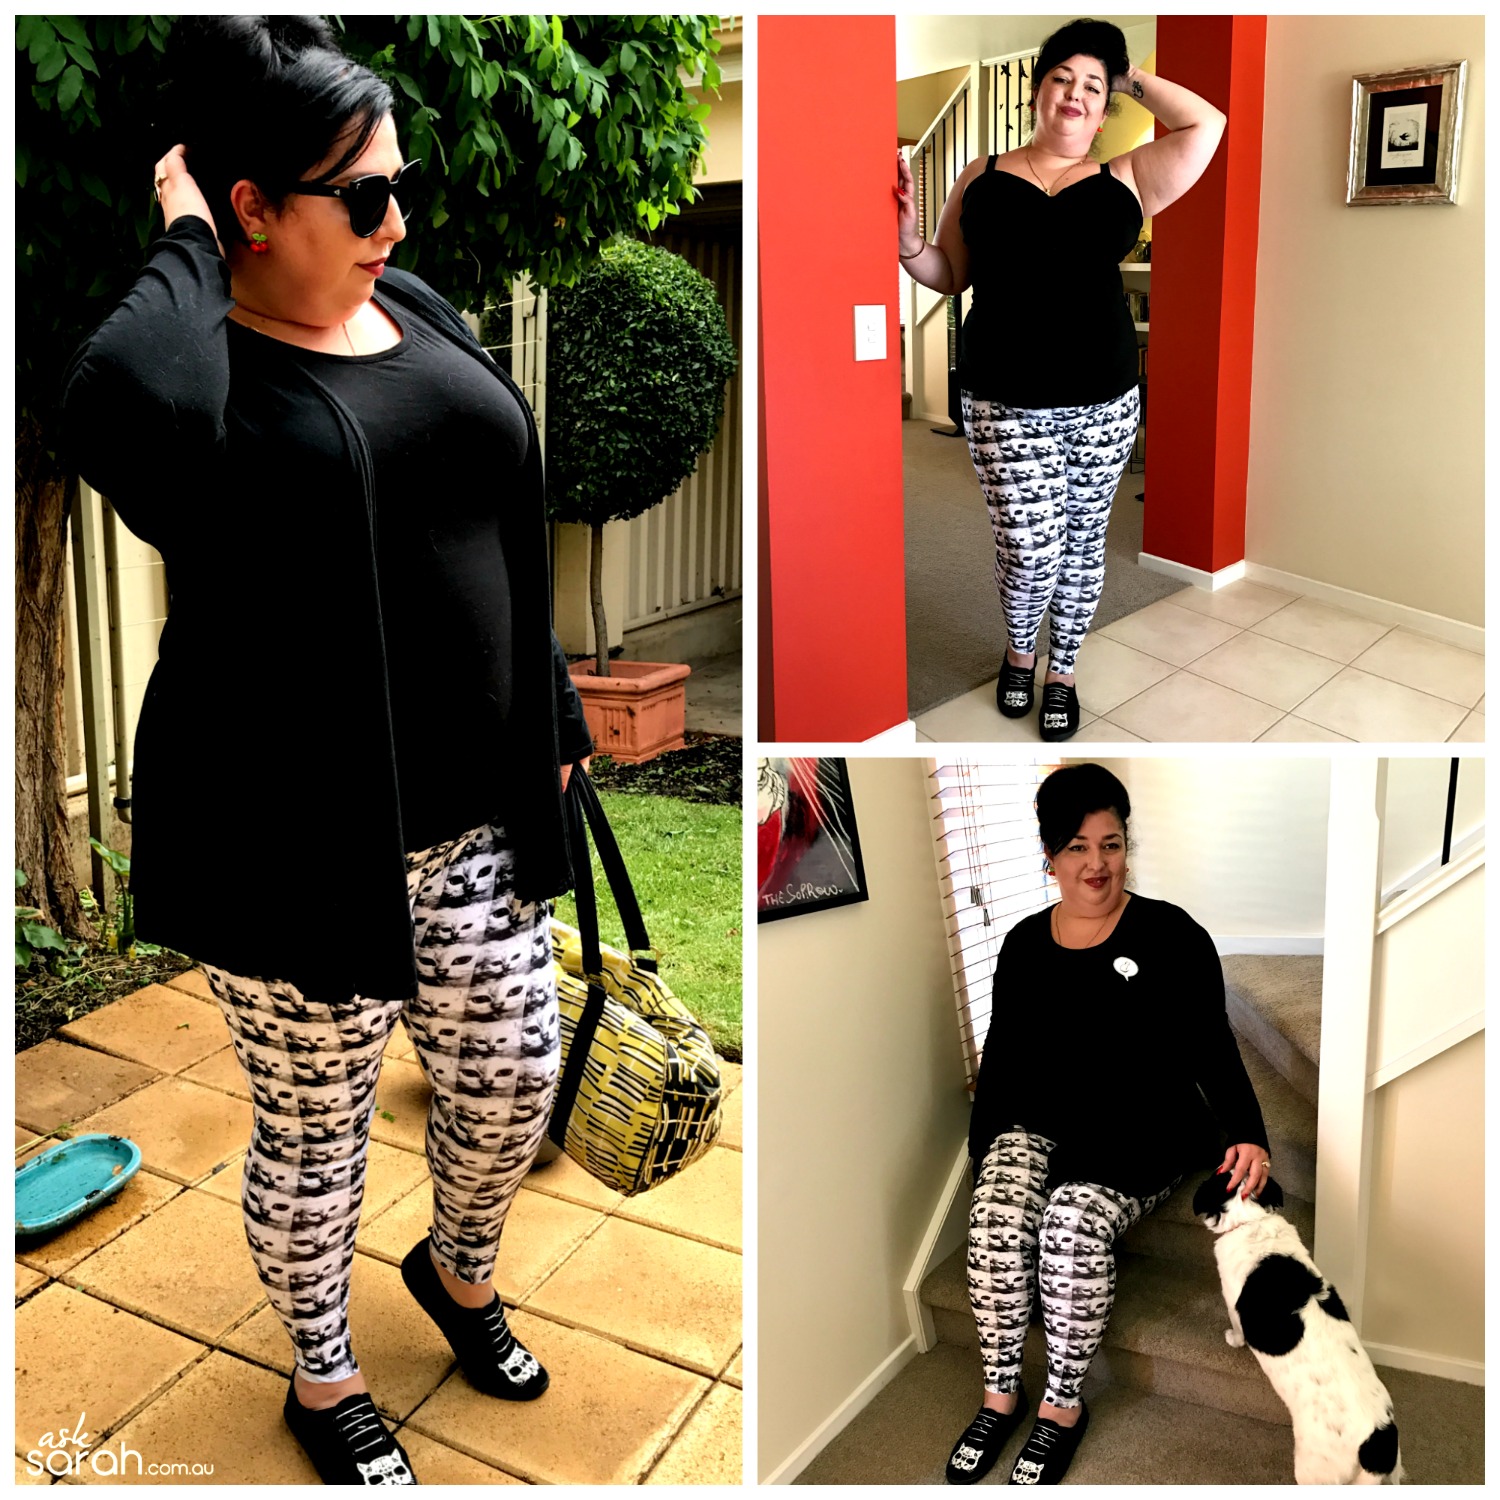 Sew DIY Leggings Tutorial {Make A Pattern From An Existing Pair Without Cutting Them Up} final